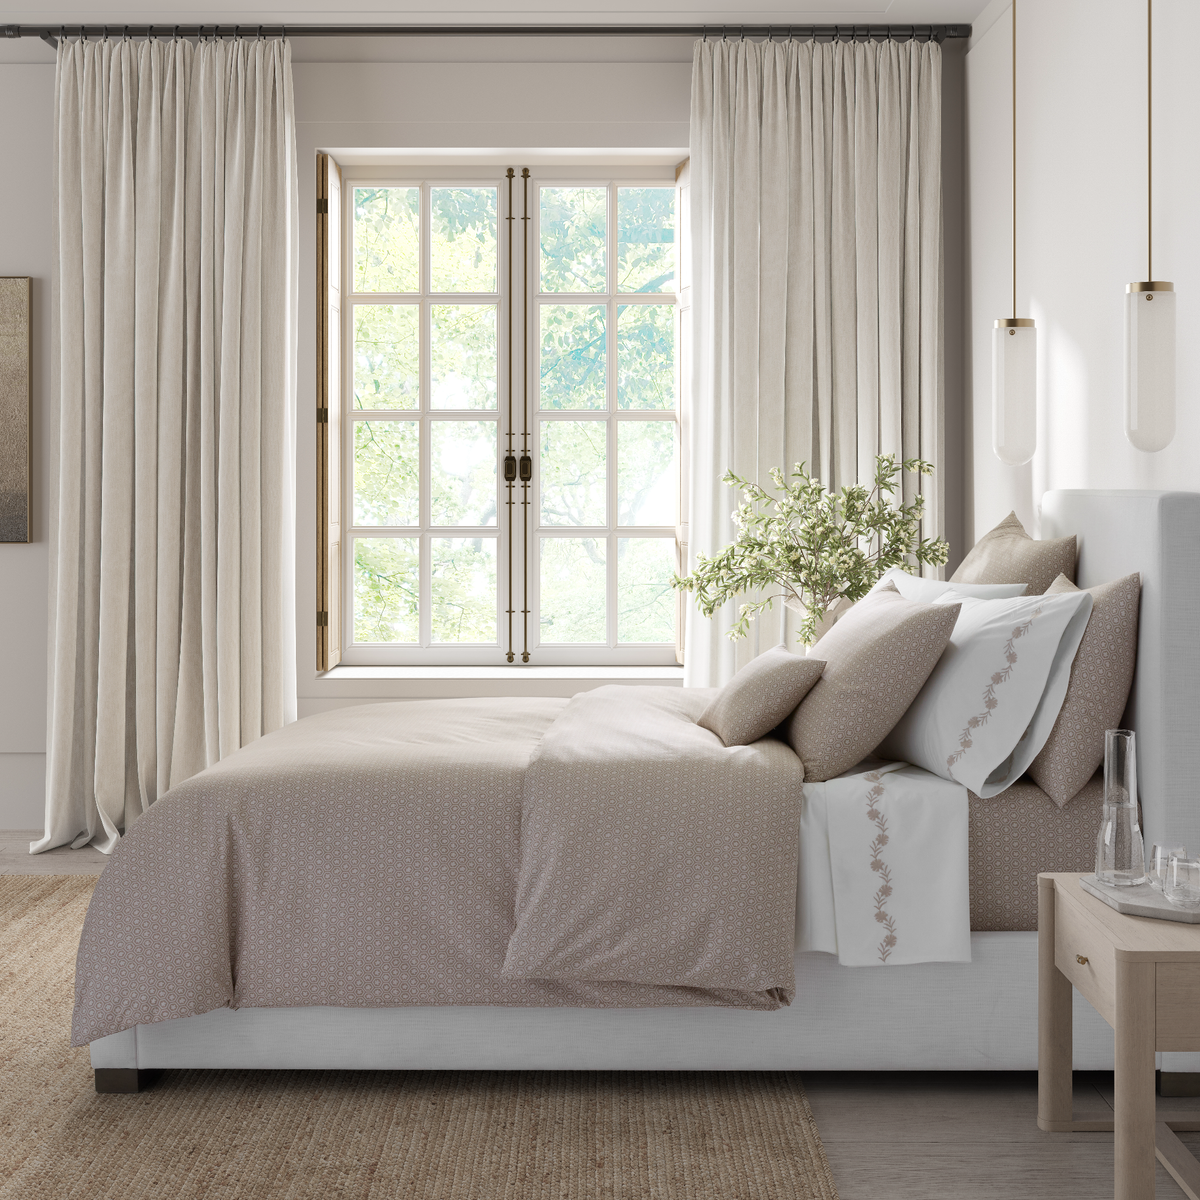 Sideview is Full Bed in Matouk Schumacher Levi Bedding Dune Color